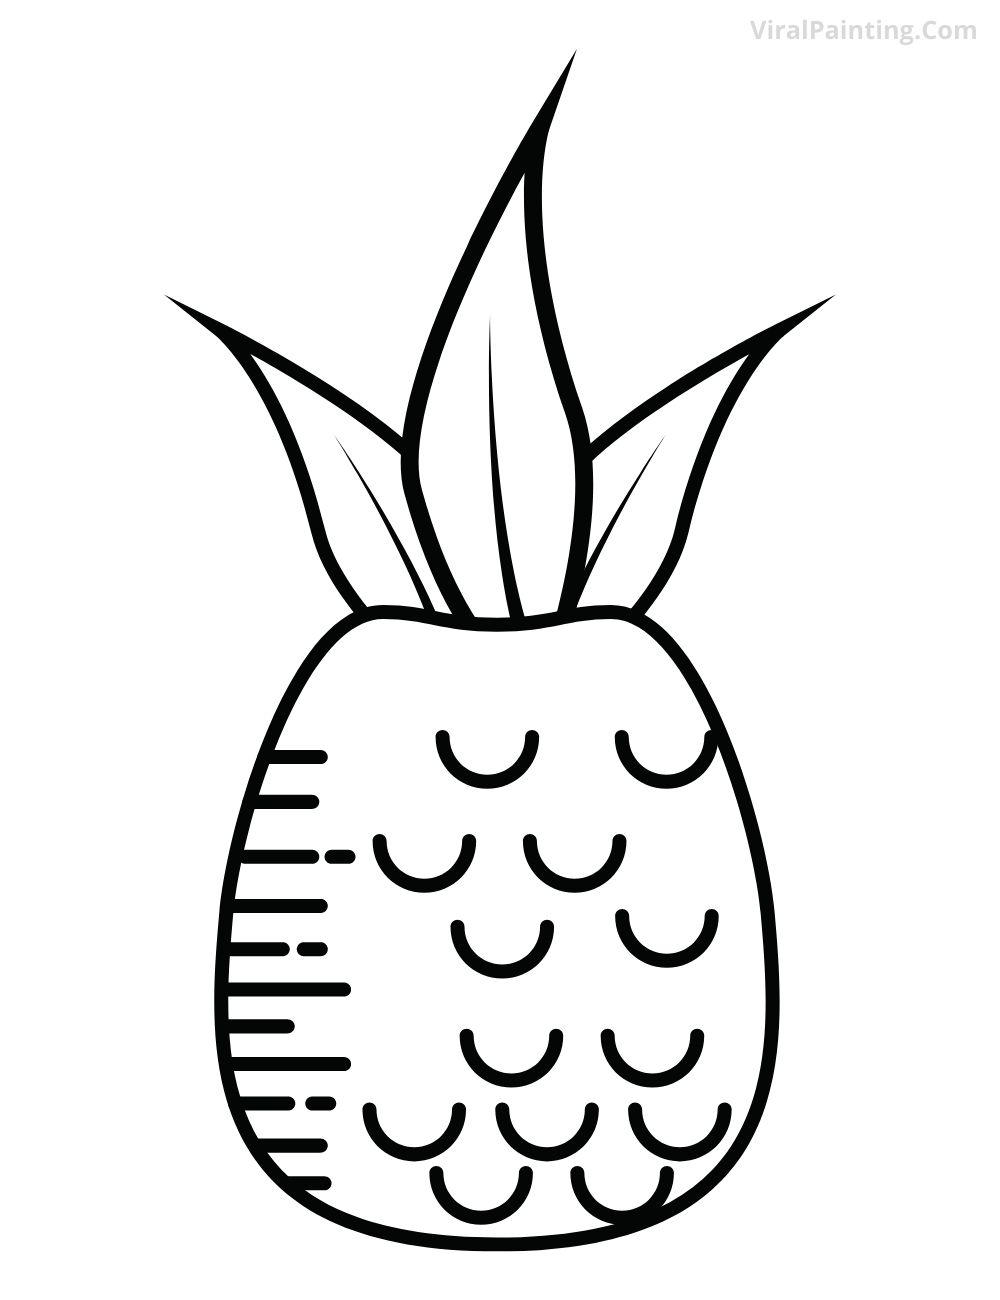 Simple and Easy pineapple drawing ideas for experts (4)